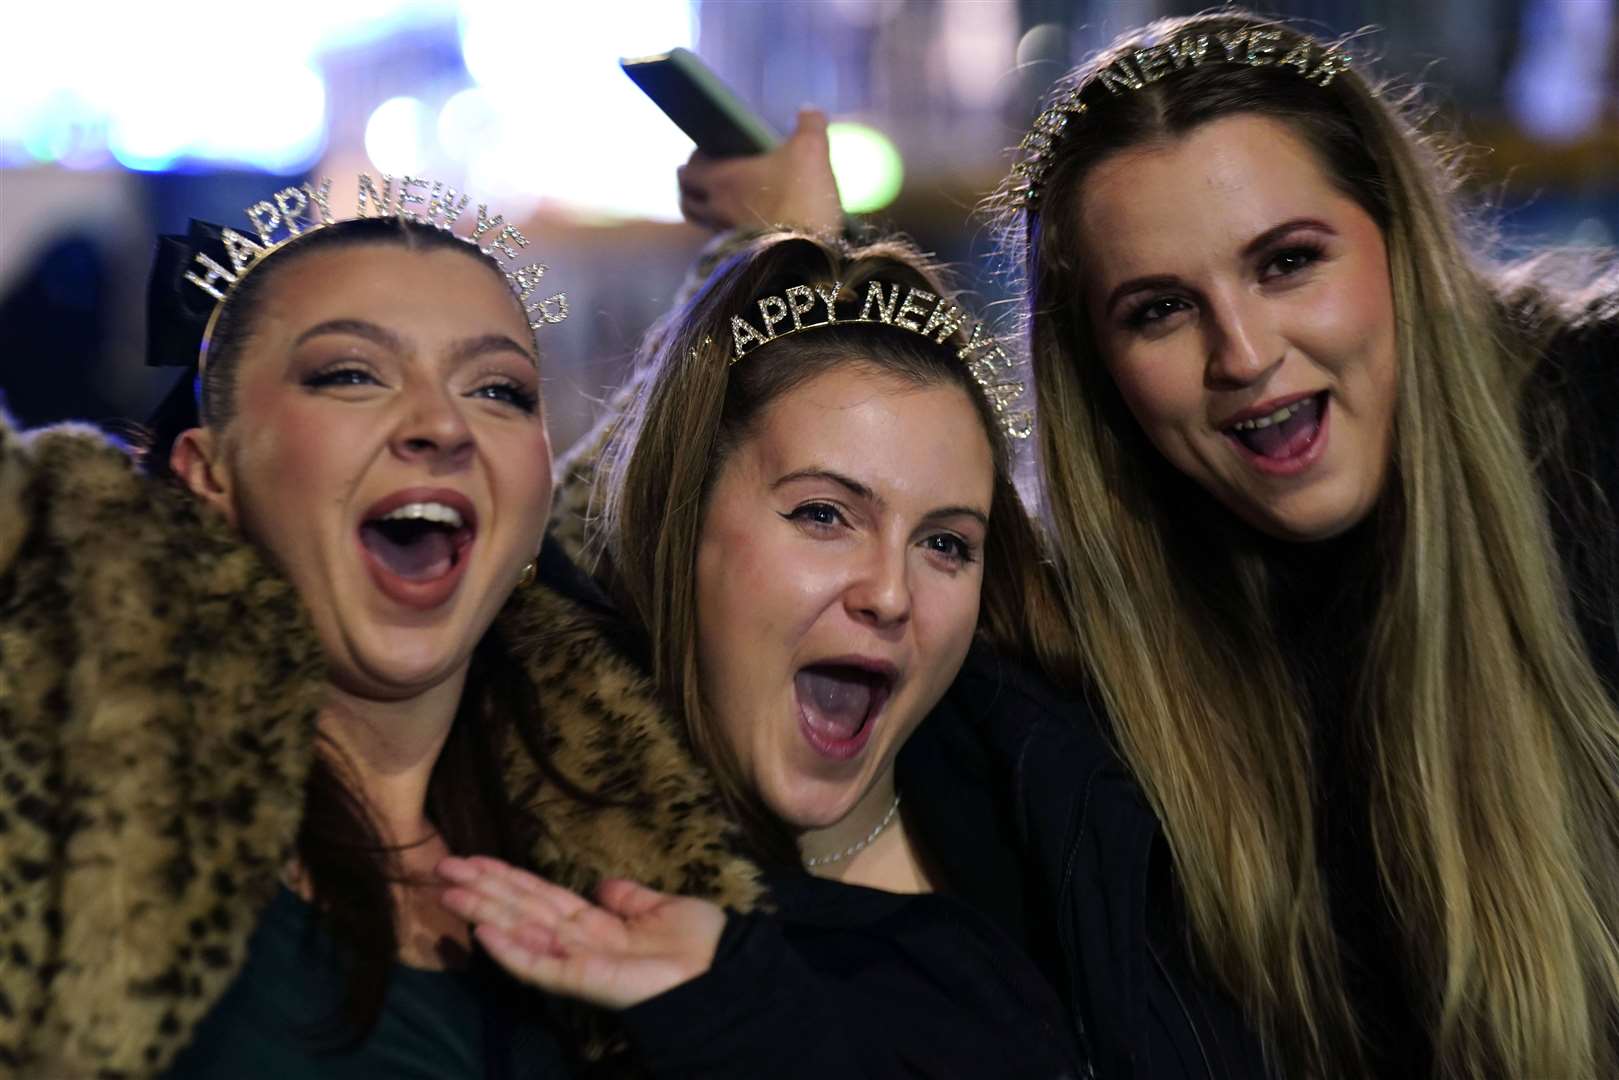 Revellers from Manchester and Liverpool at the Hogmanay New Year celebrations in Edinburgh (Jane Barlow/PA)